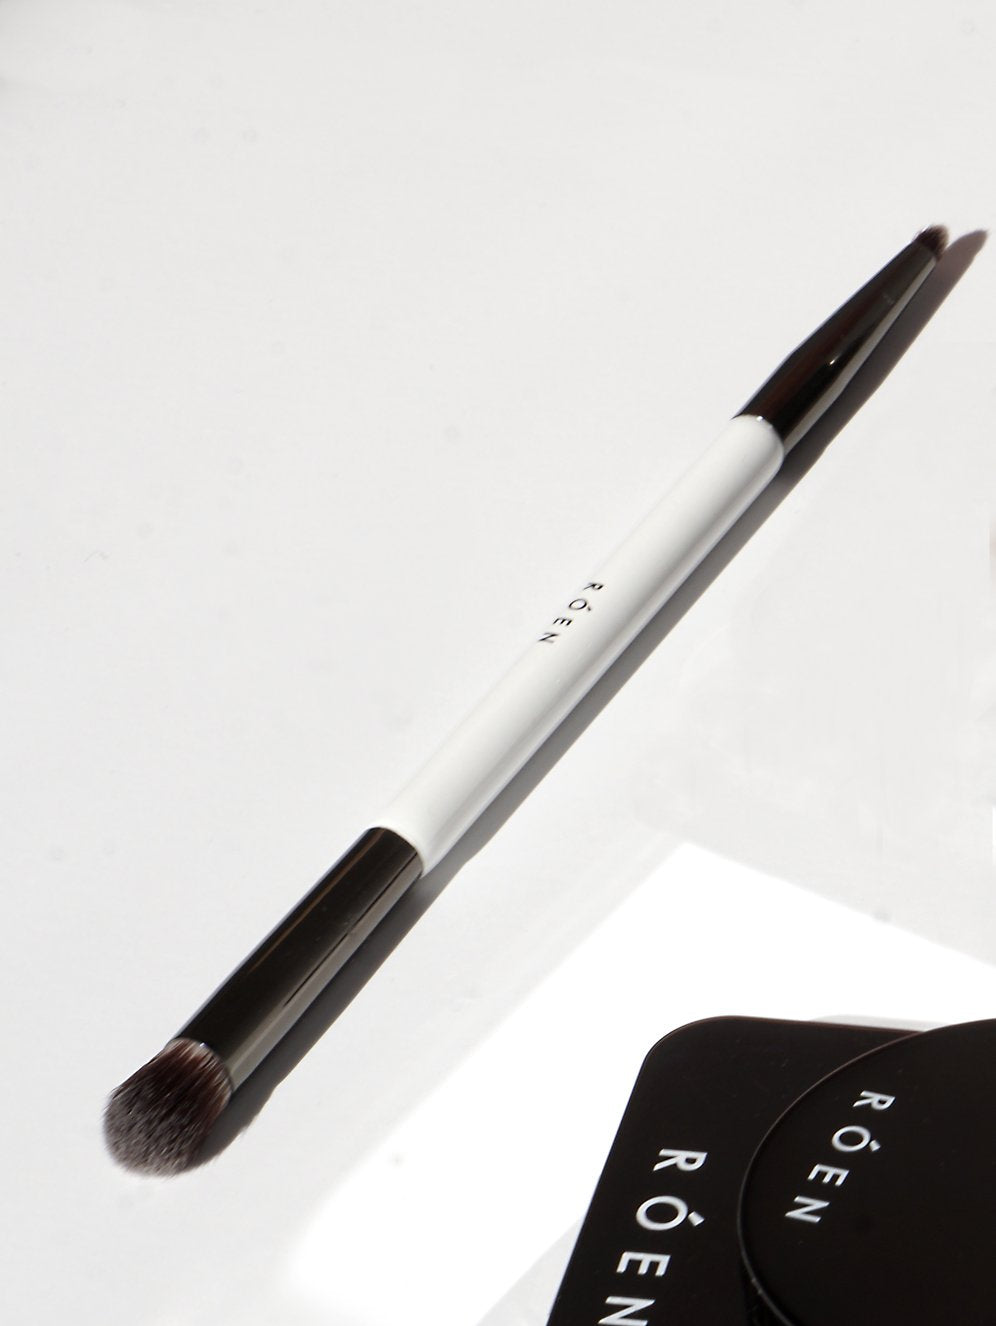 ROEN BEAUTY Makeup - Everything Eye Brush - Use it to blend, line, pick up product, and smudge. The Everything Eye Brush is vegan, cruelty free, and easy to clean.